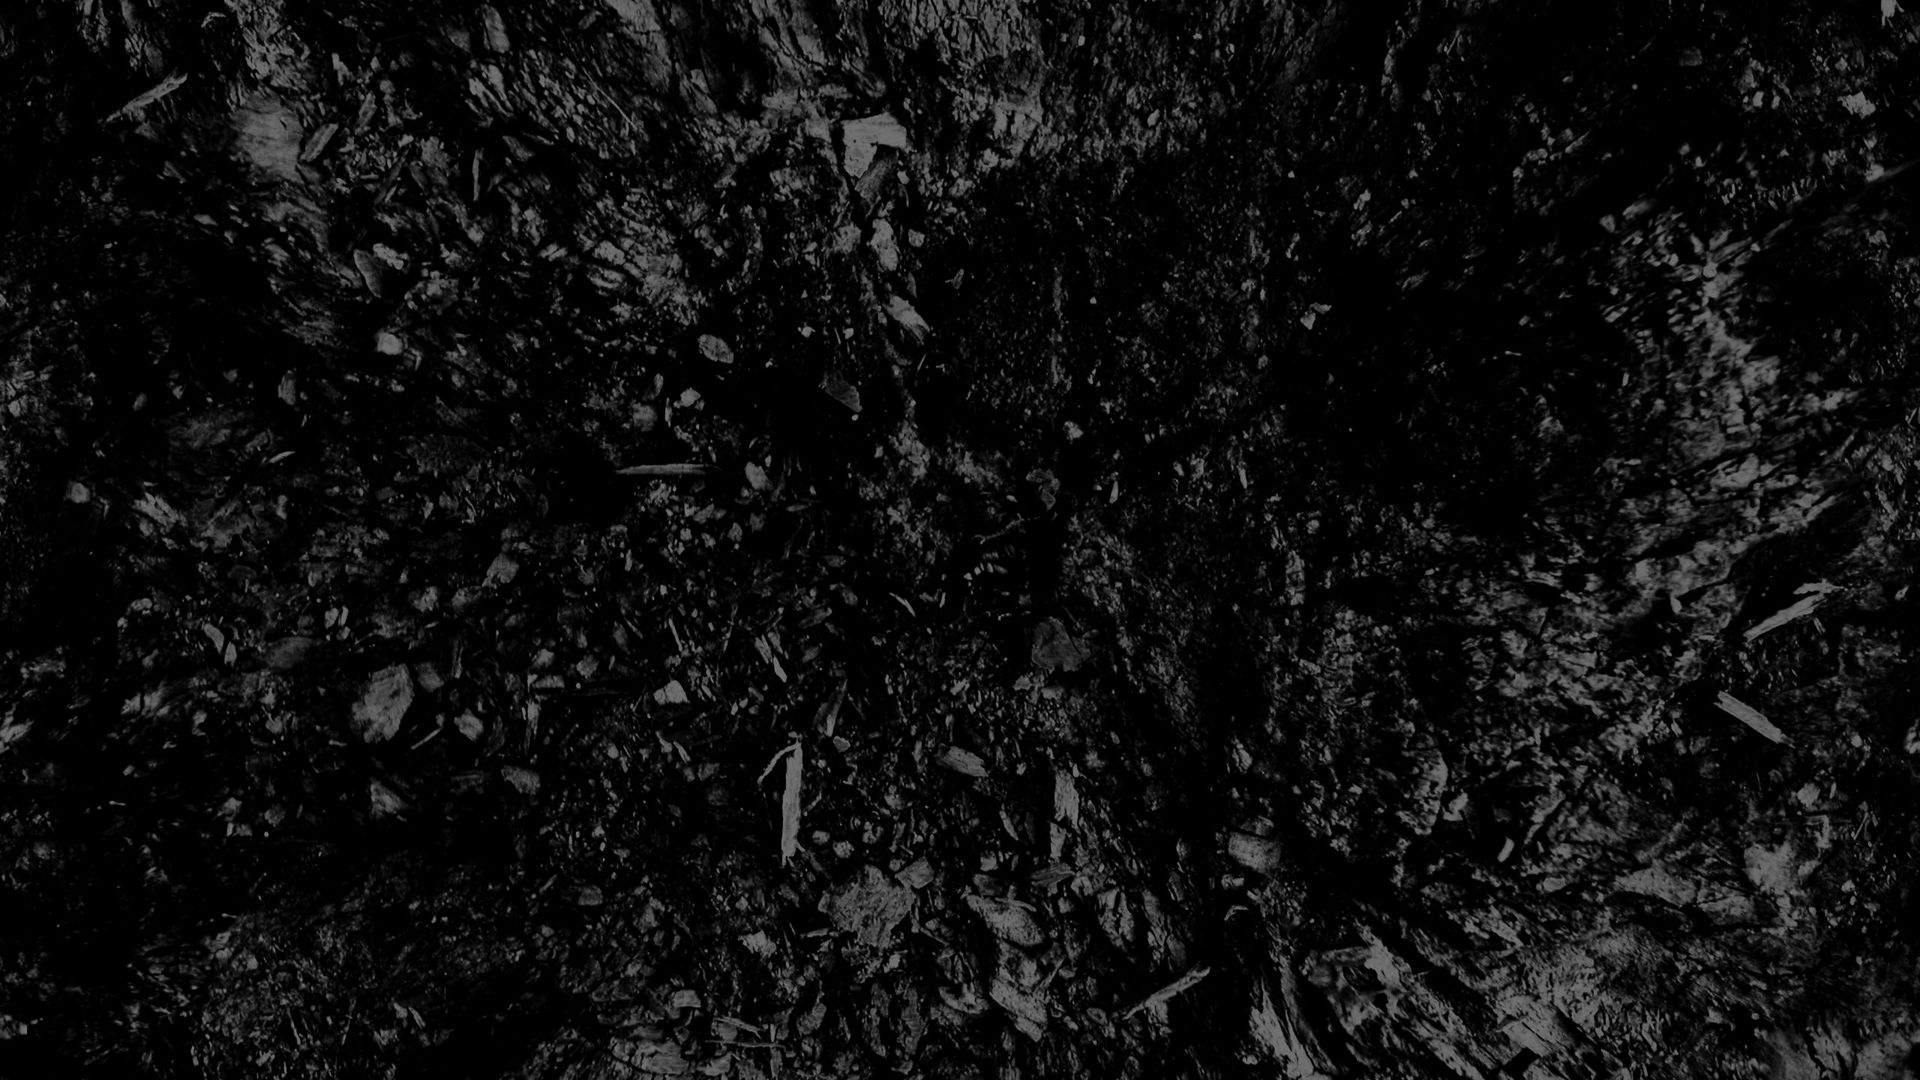 Download wallpaper 1920x1080 dark, black and white, abstract, black  background full hd, hdtv, fhd, 1080p hd background